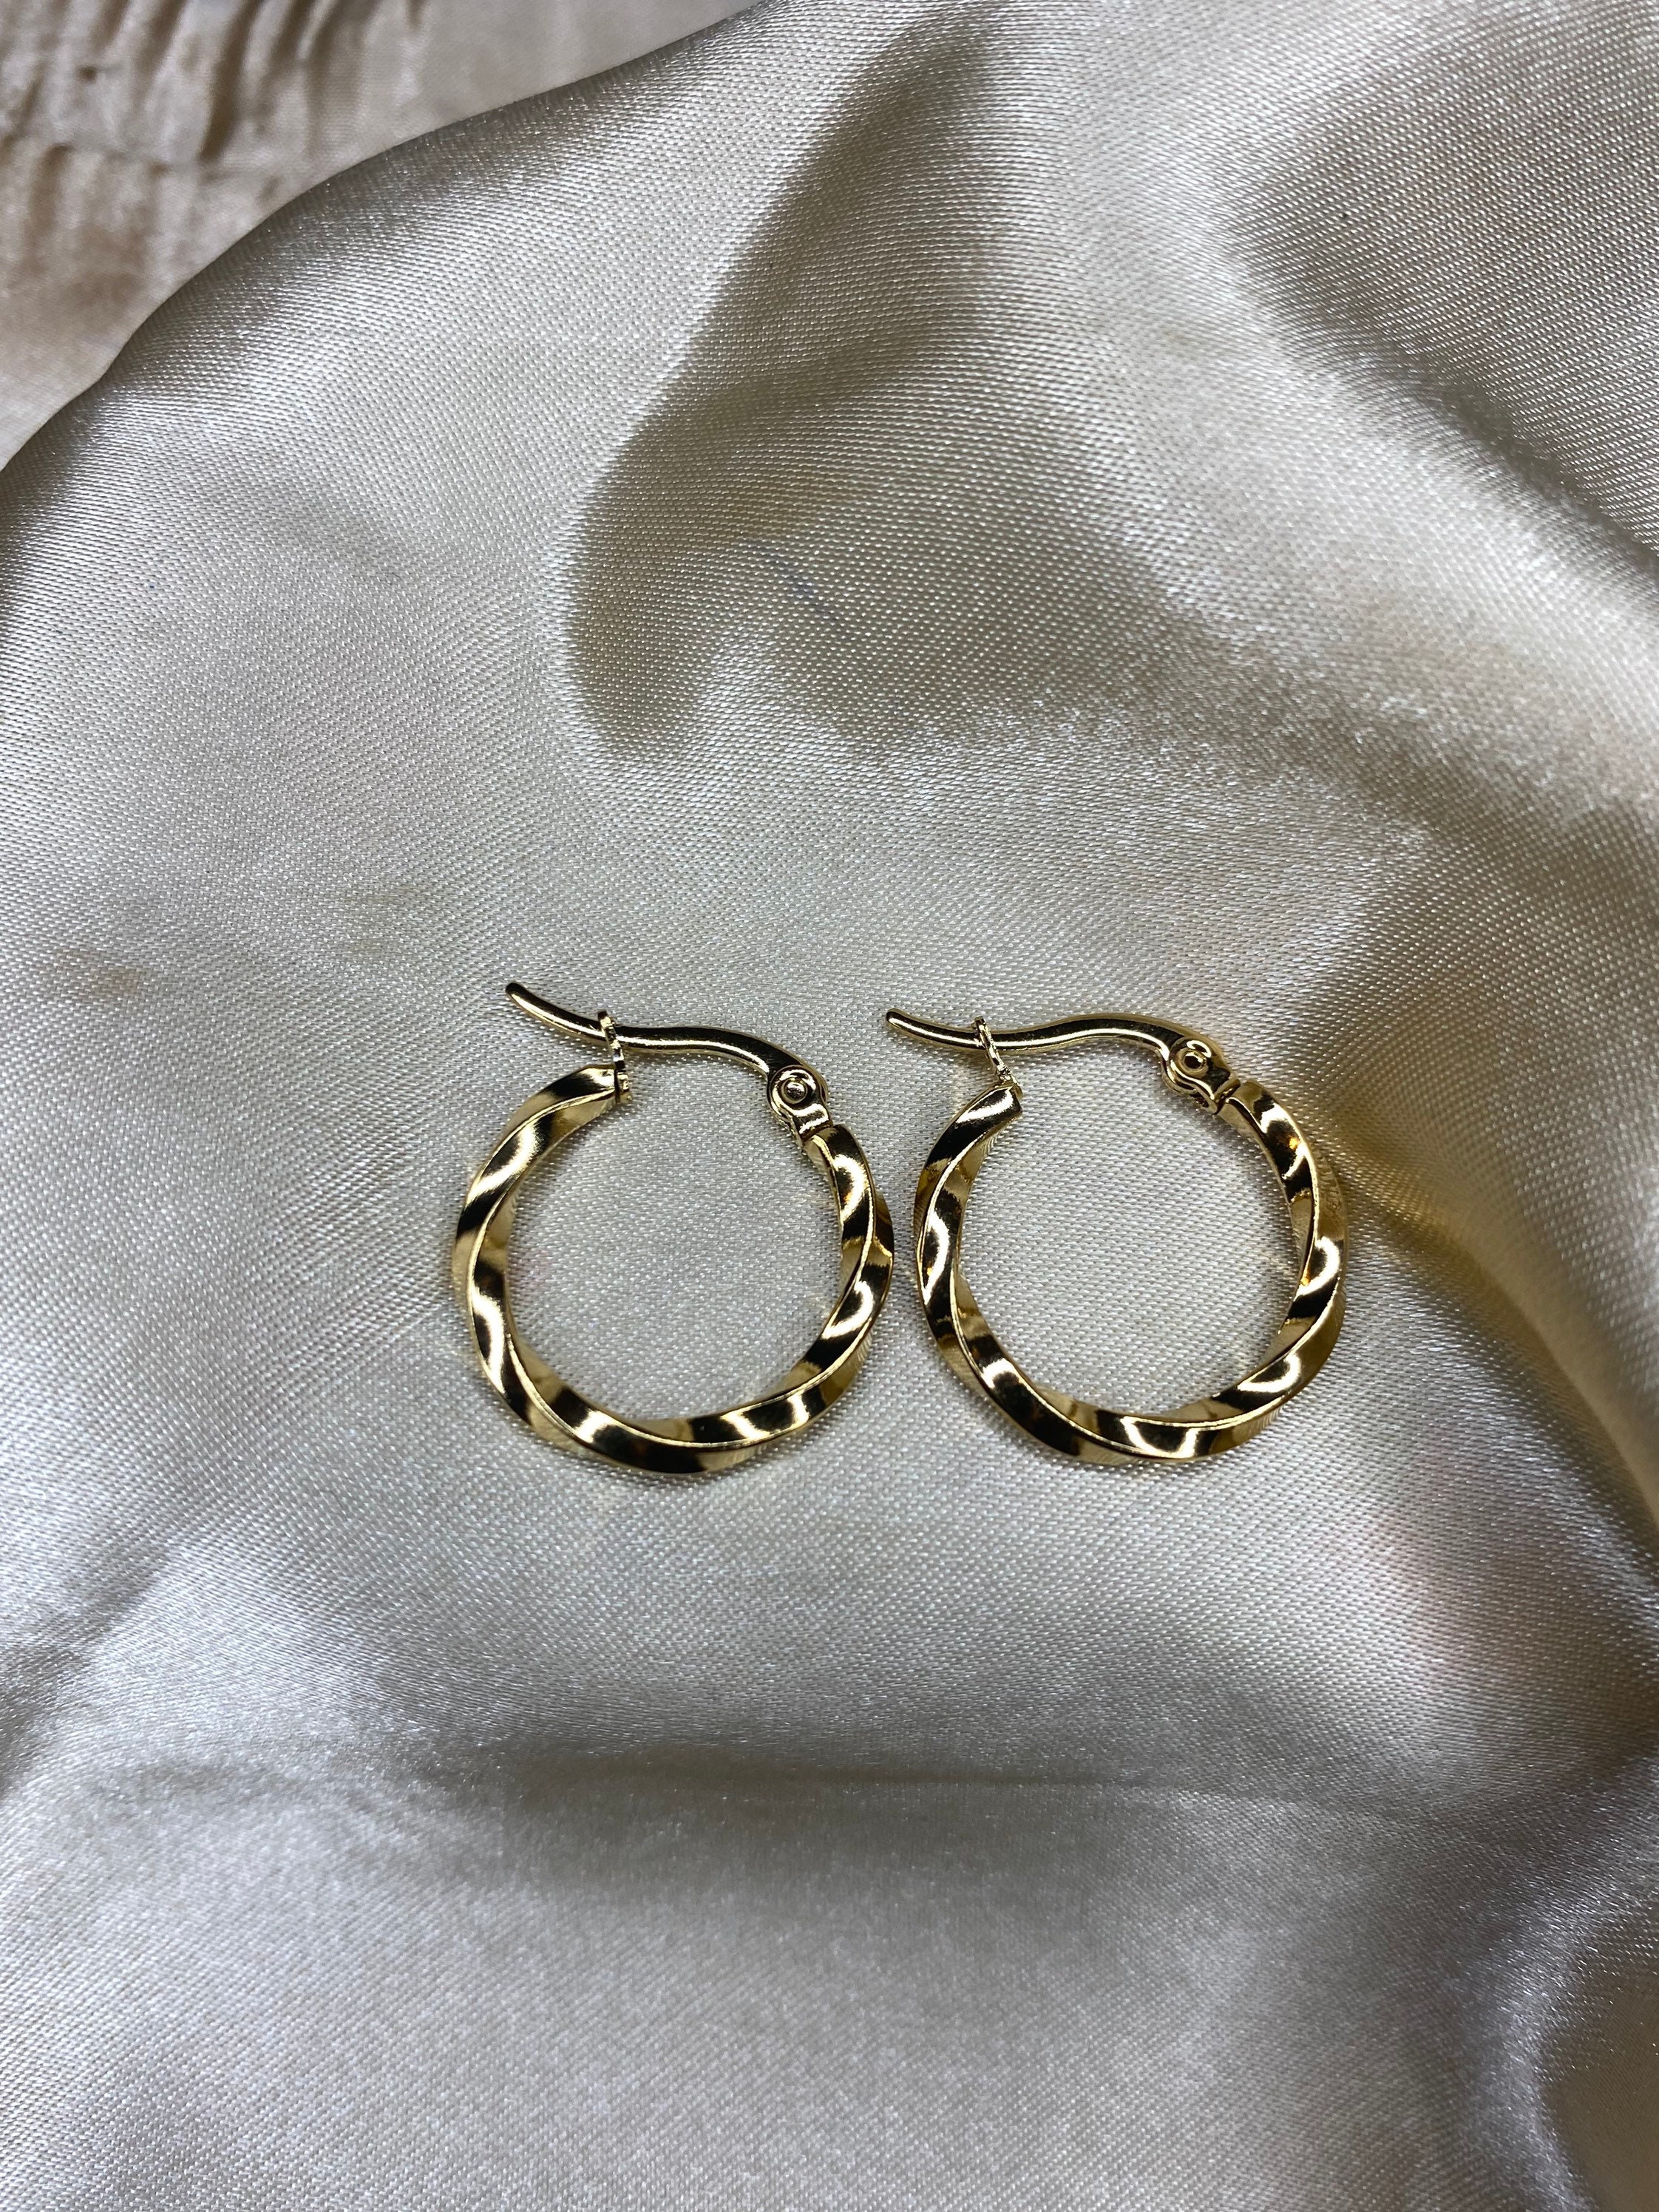 Twisted Gold Earrings 18k Gold Plated Hoops Gold Hoop - Etsy